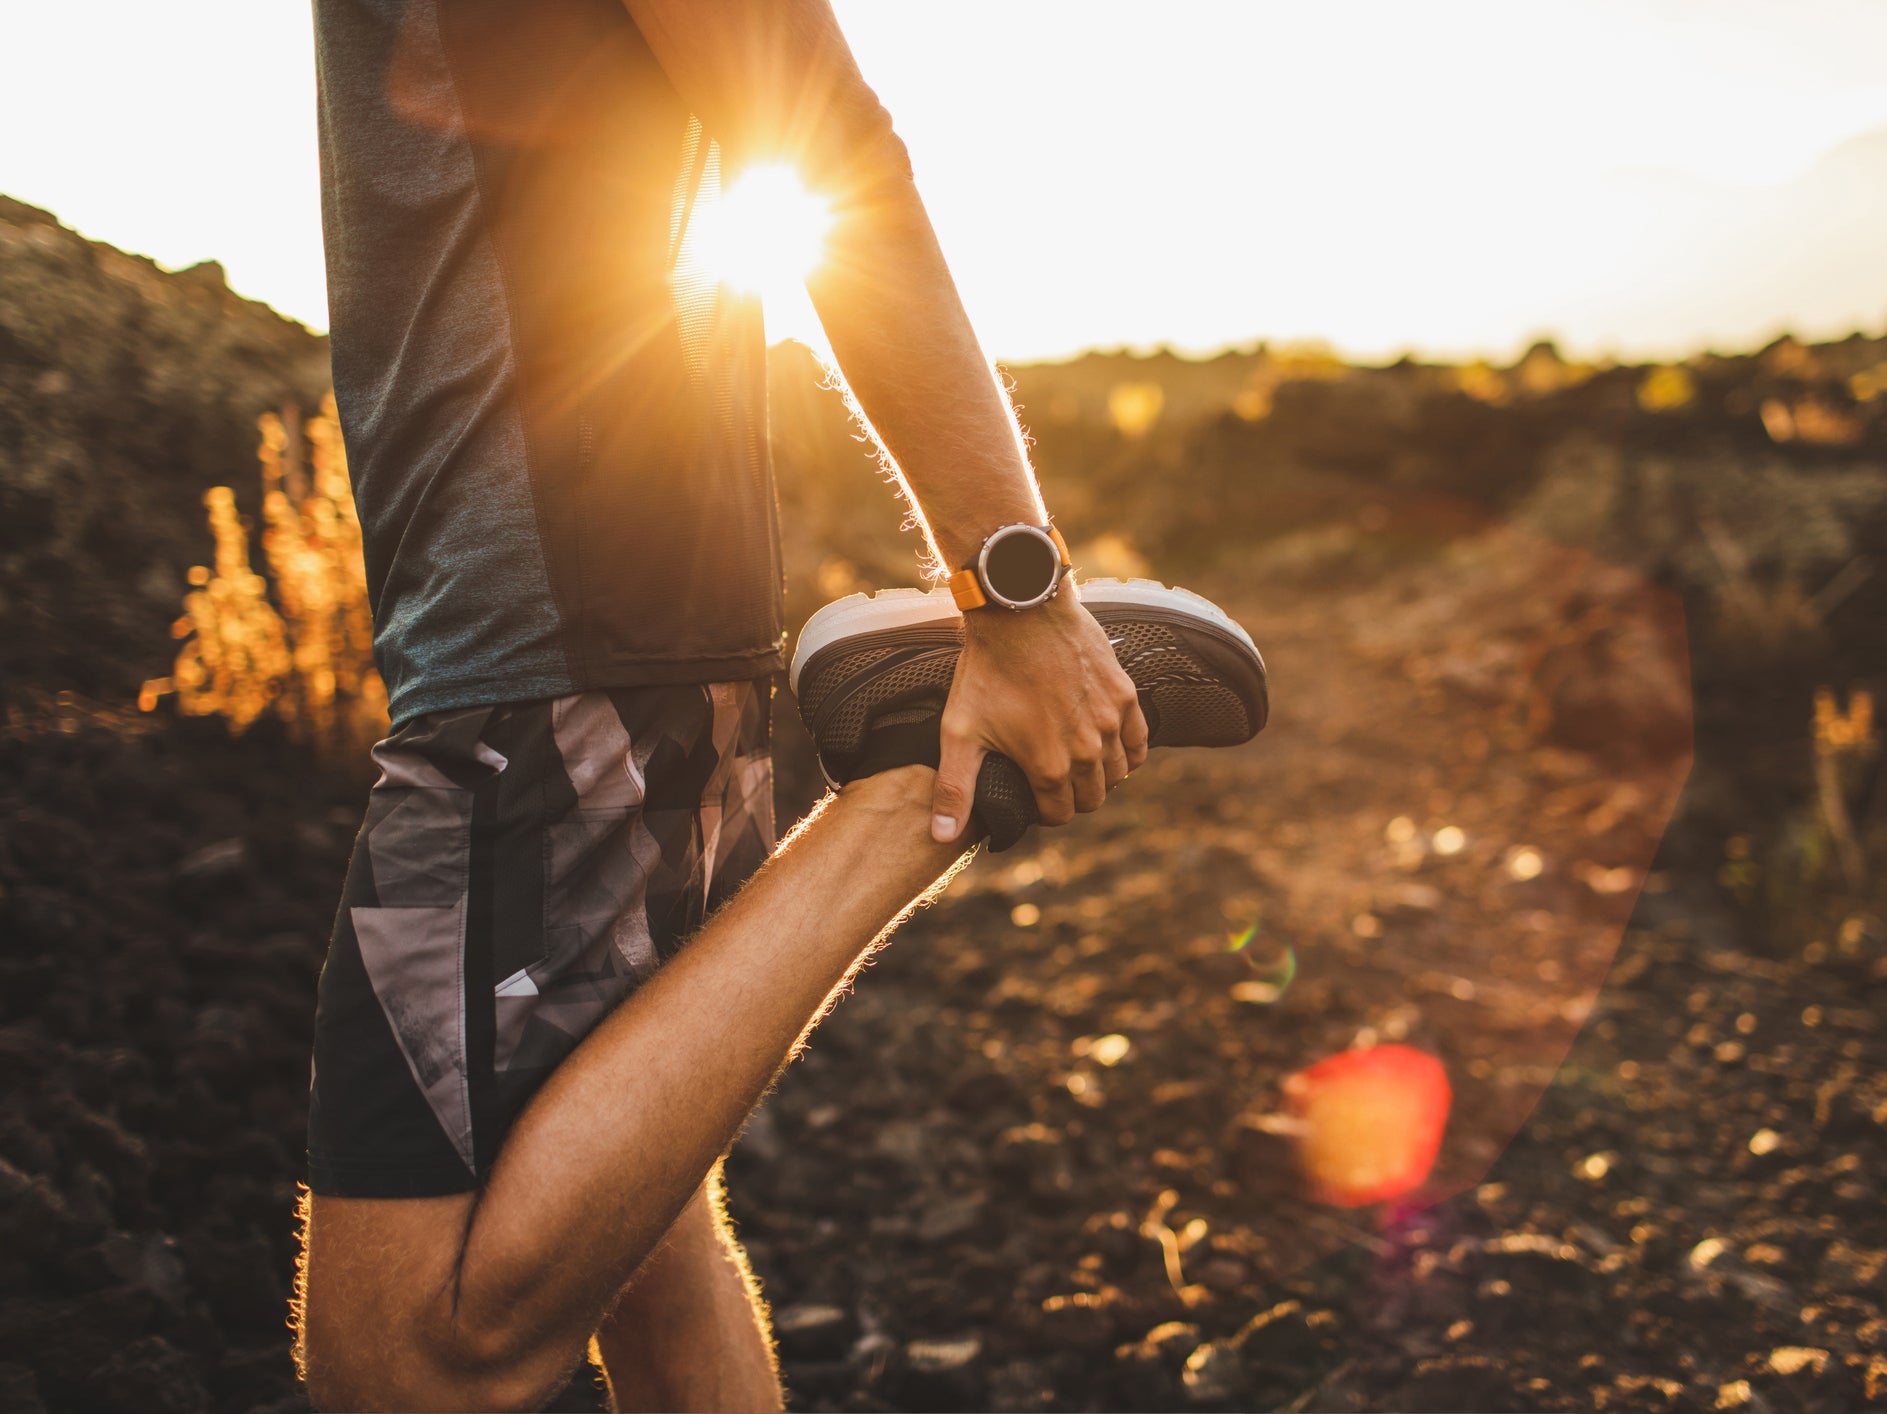 Falling in love as runners, or hooking up with other ones, isn’t that uncommon